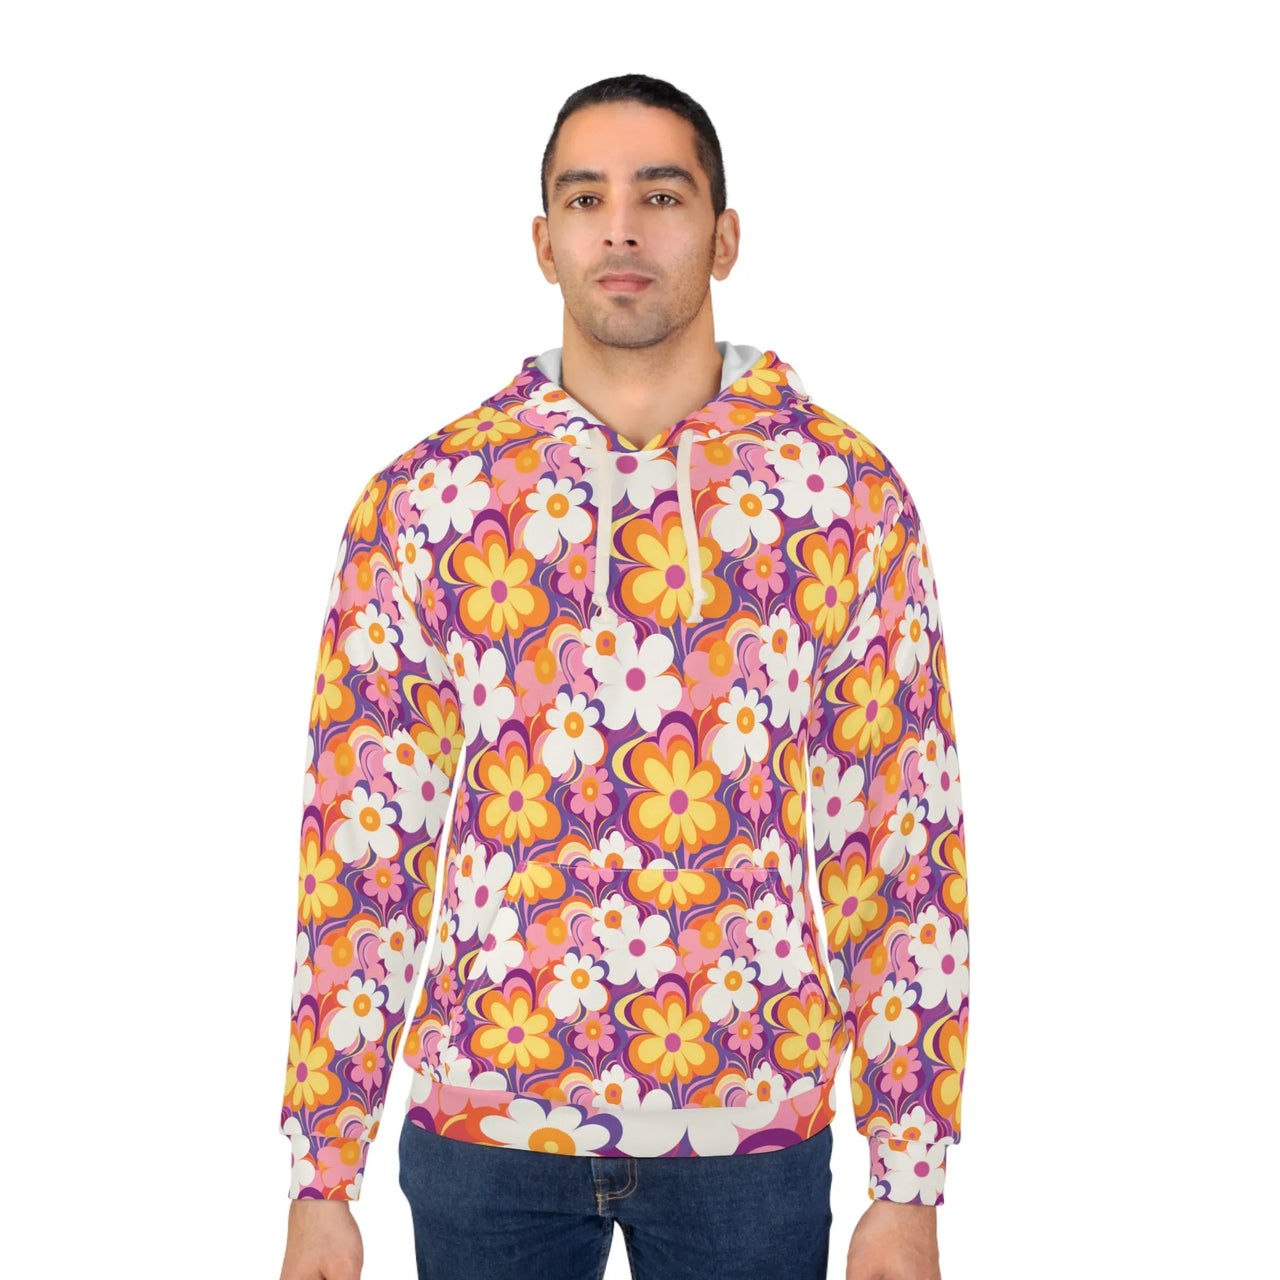 Retro Radiance: Luminous Floral Hoodie for Artful Days